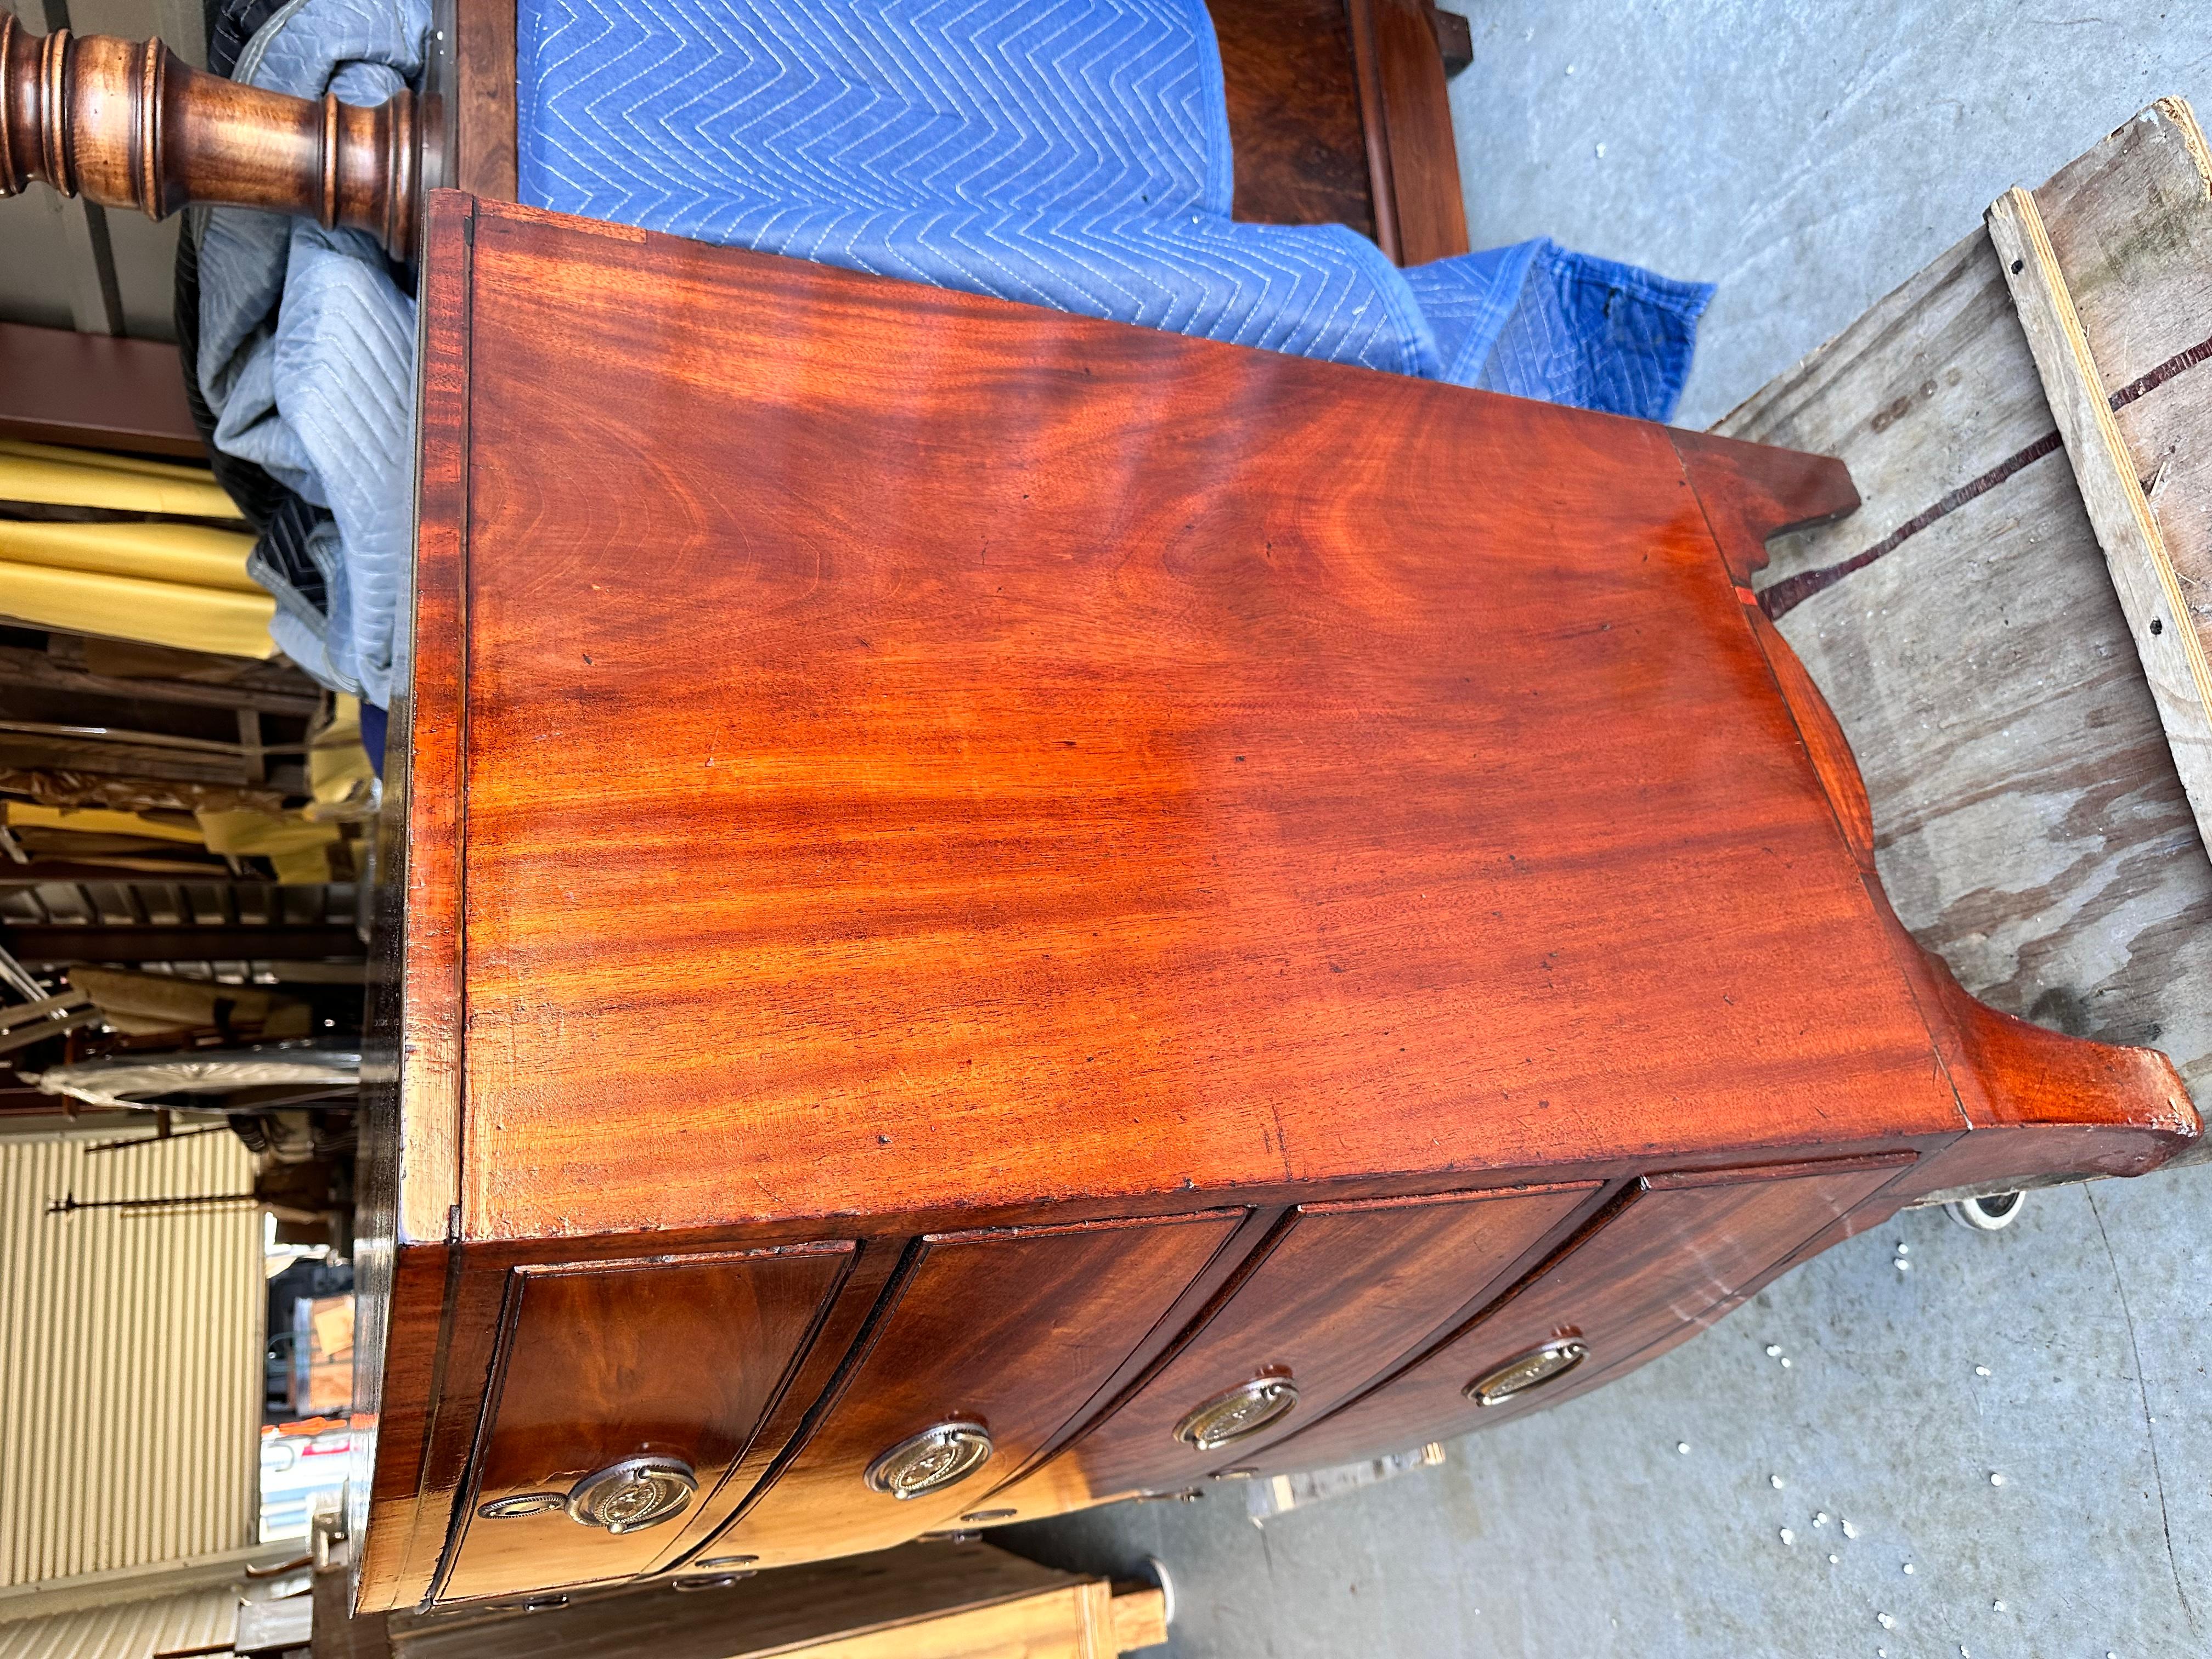 This is a stunning English bow front chest. It’s been beautifully French polished make the flamed mahogany really glow. Matched with exquisite brass pulls on drawers that slide perfectly.